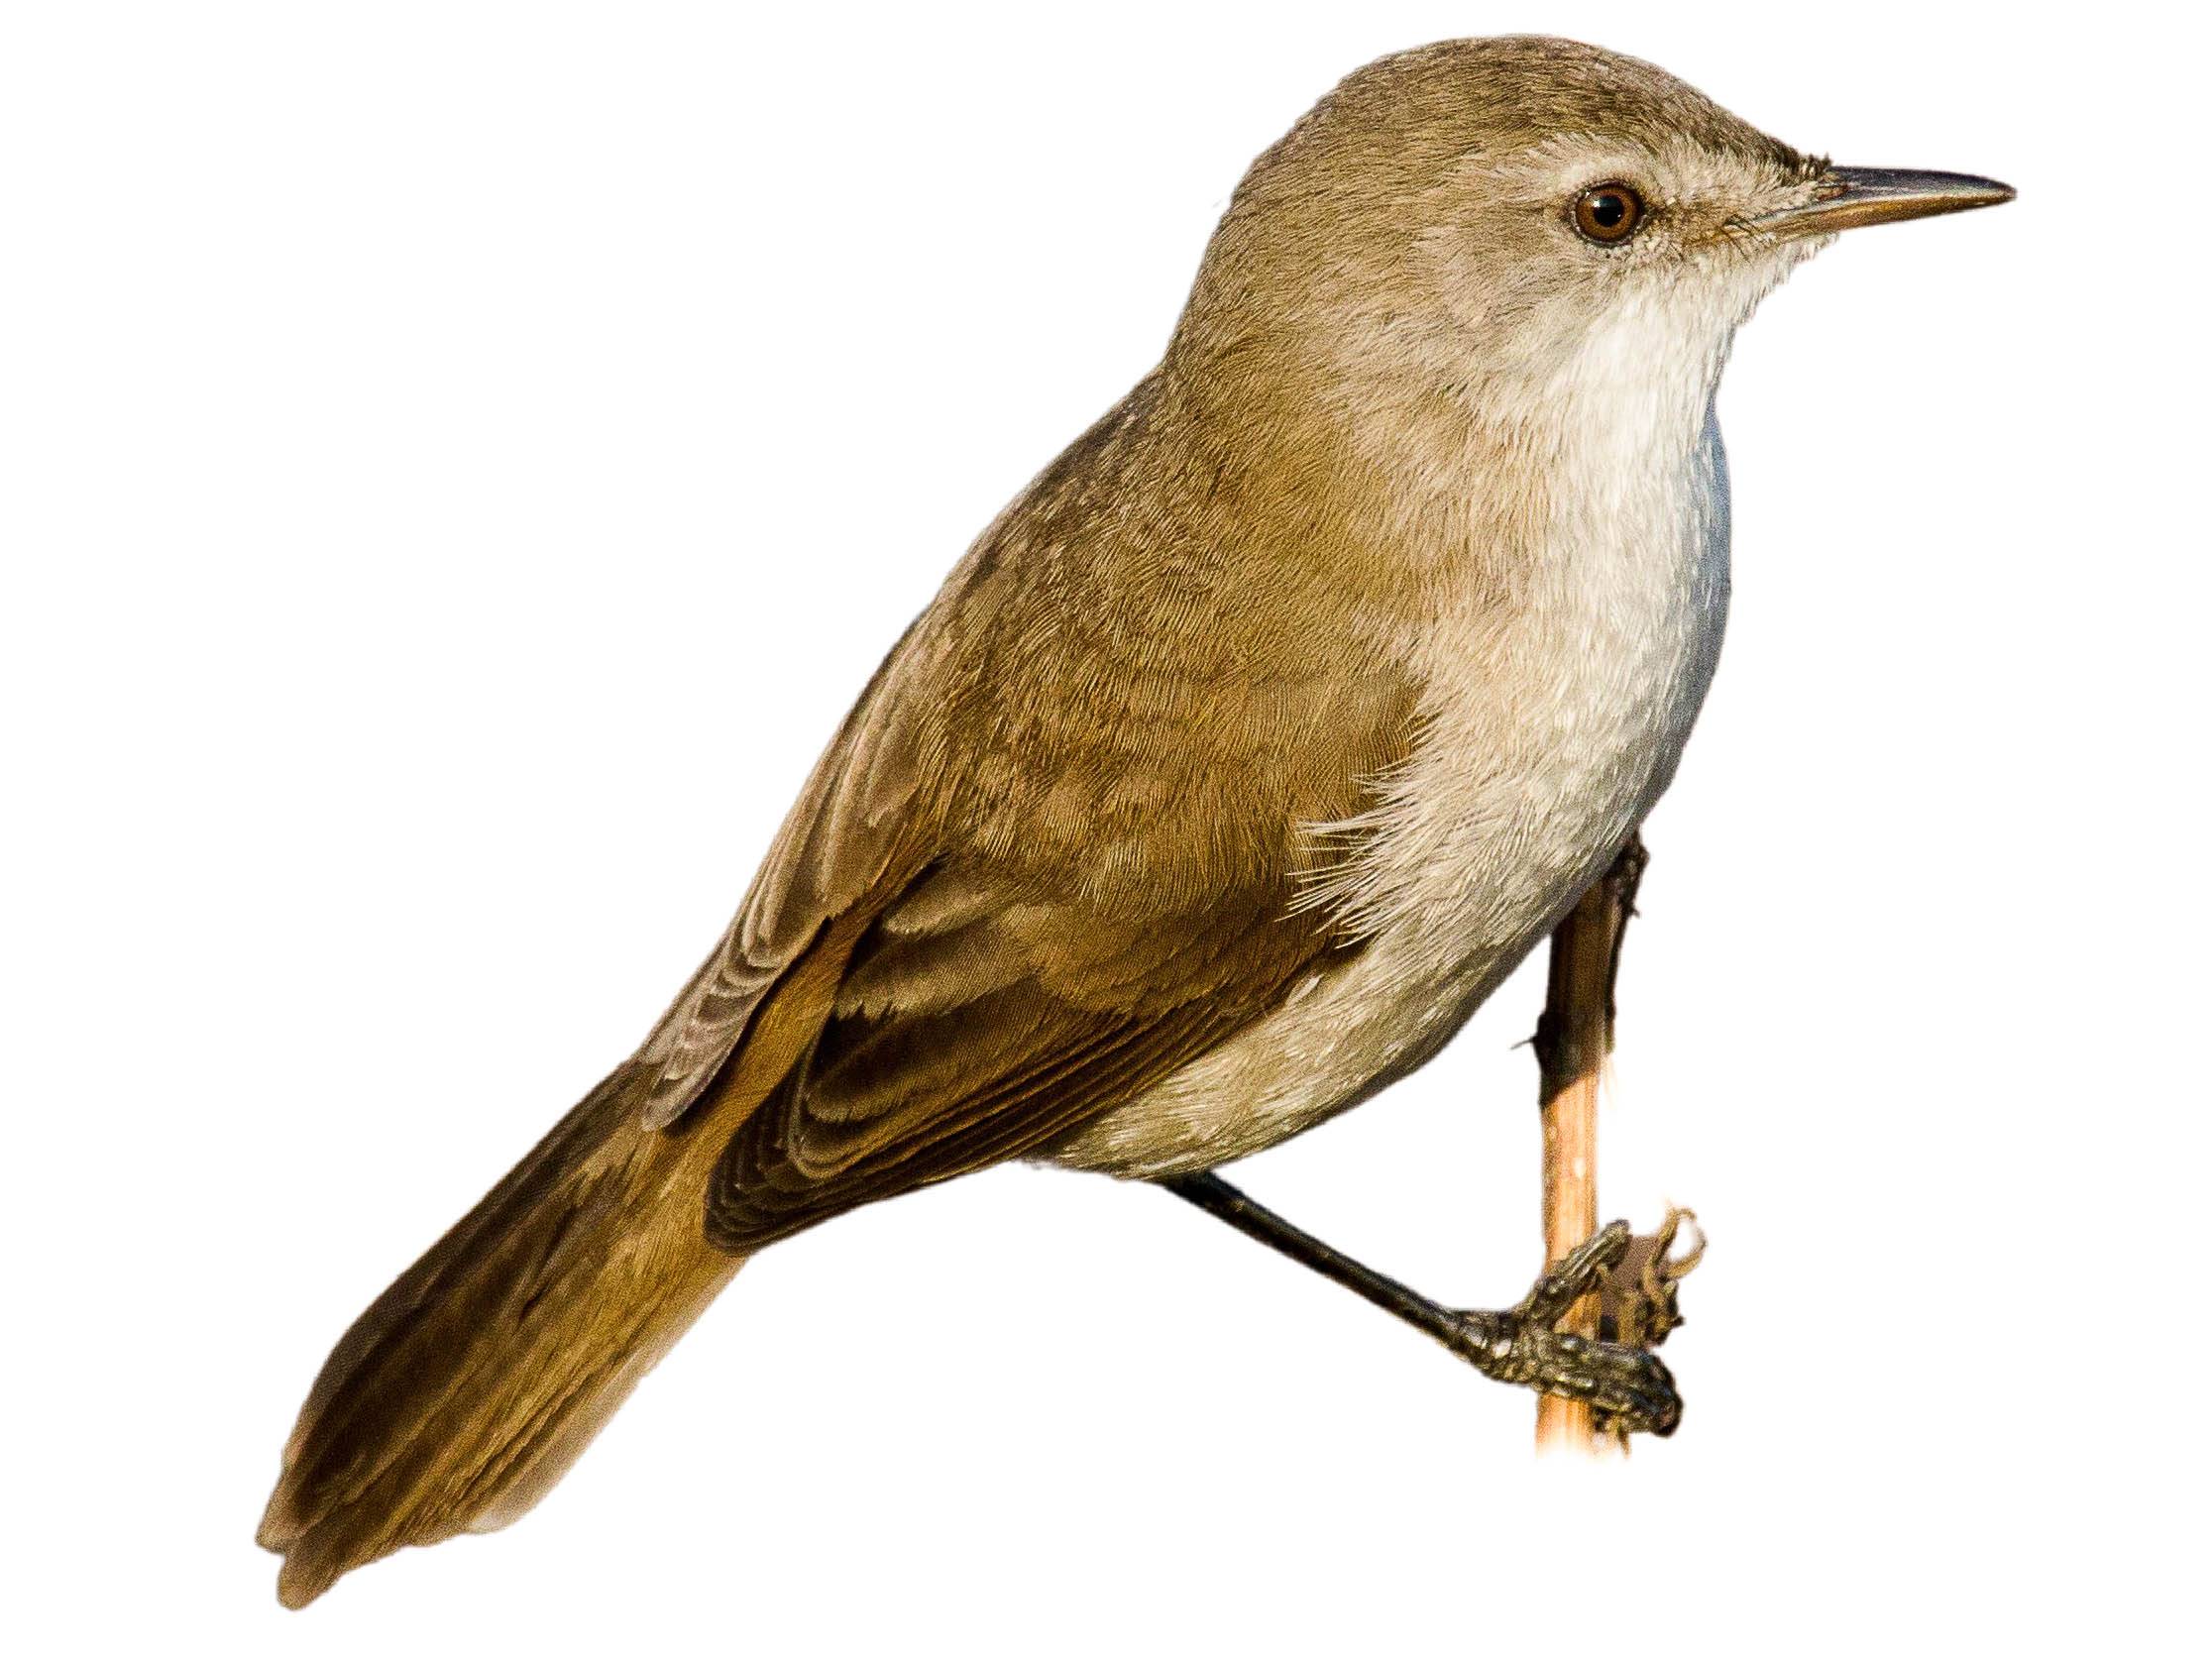 A photo of a African Reed Warbler (Acrocephalus baeticatus)